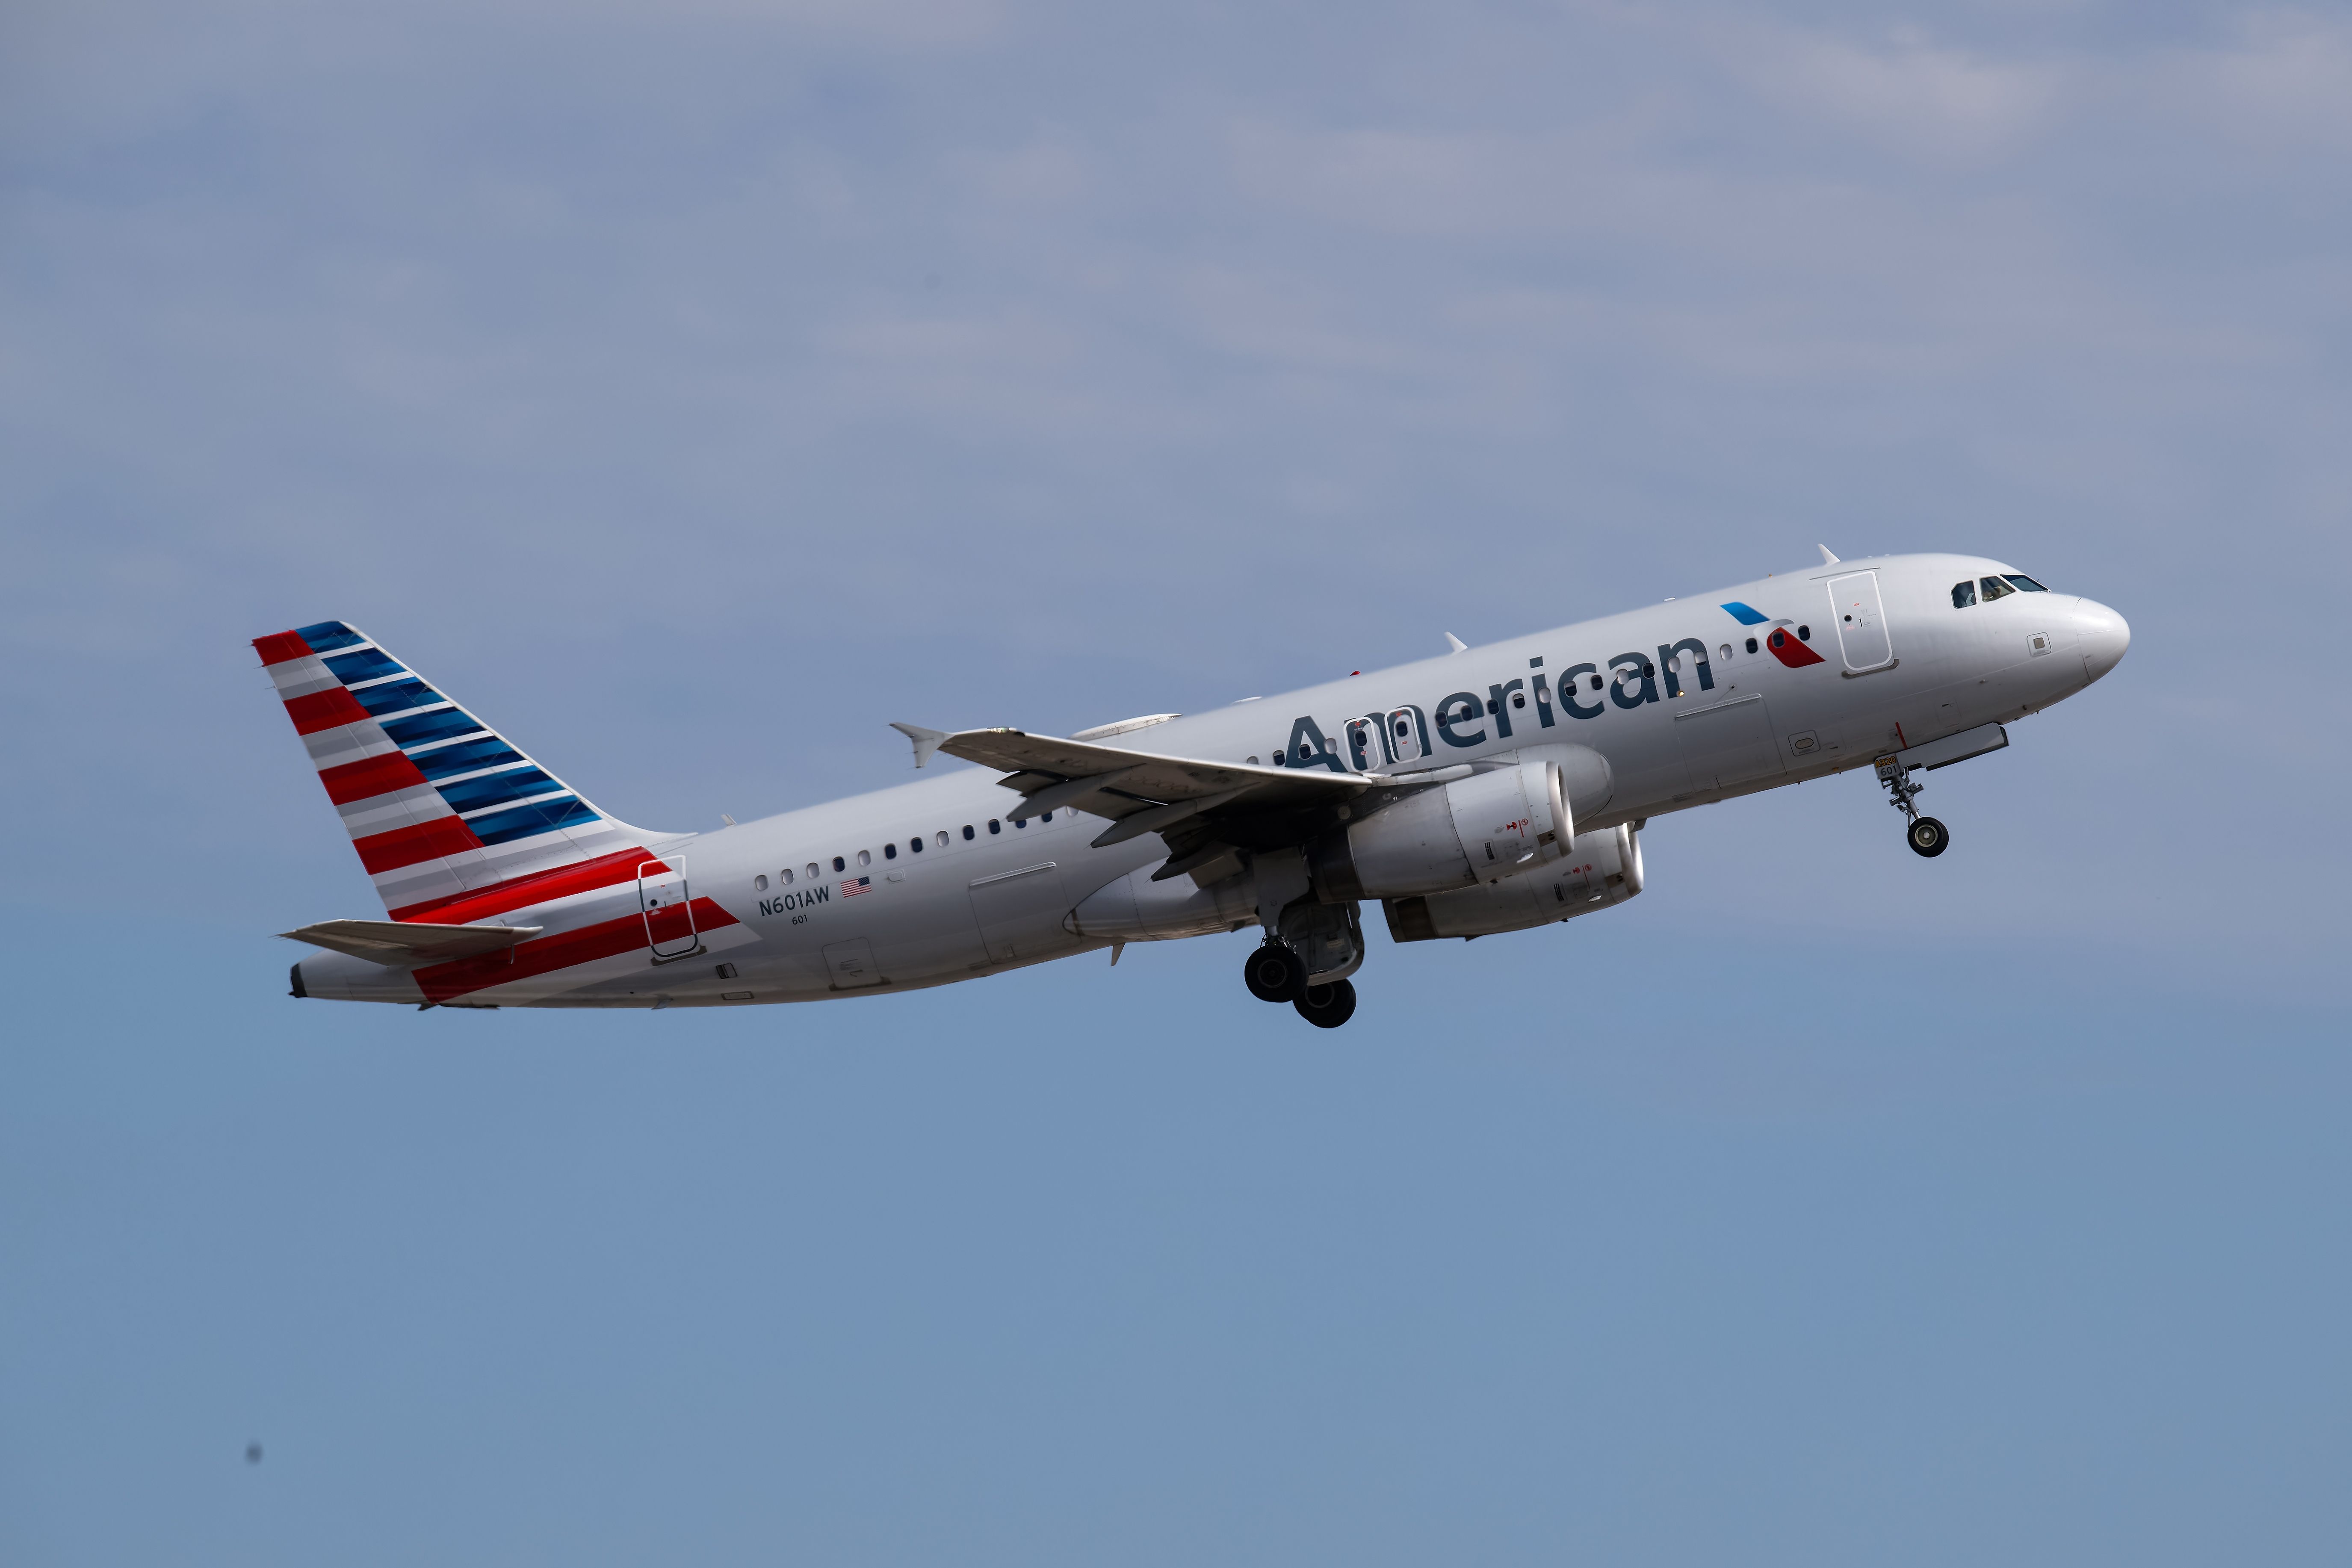 An American Airlines aircraft flying in the sky.